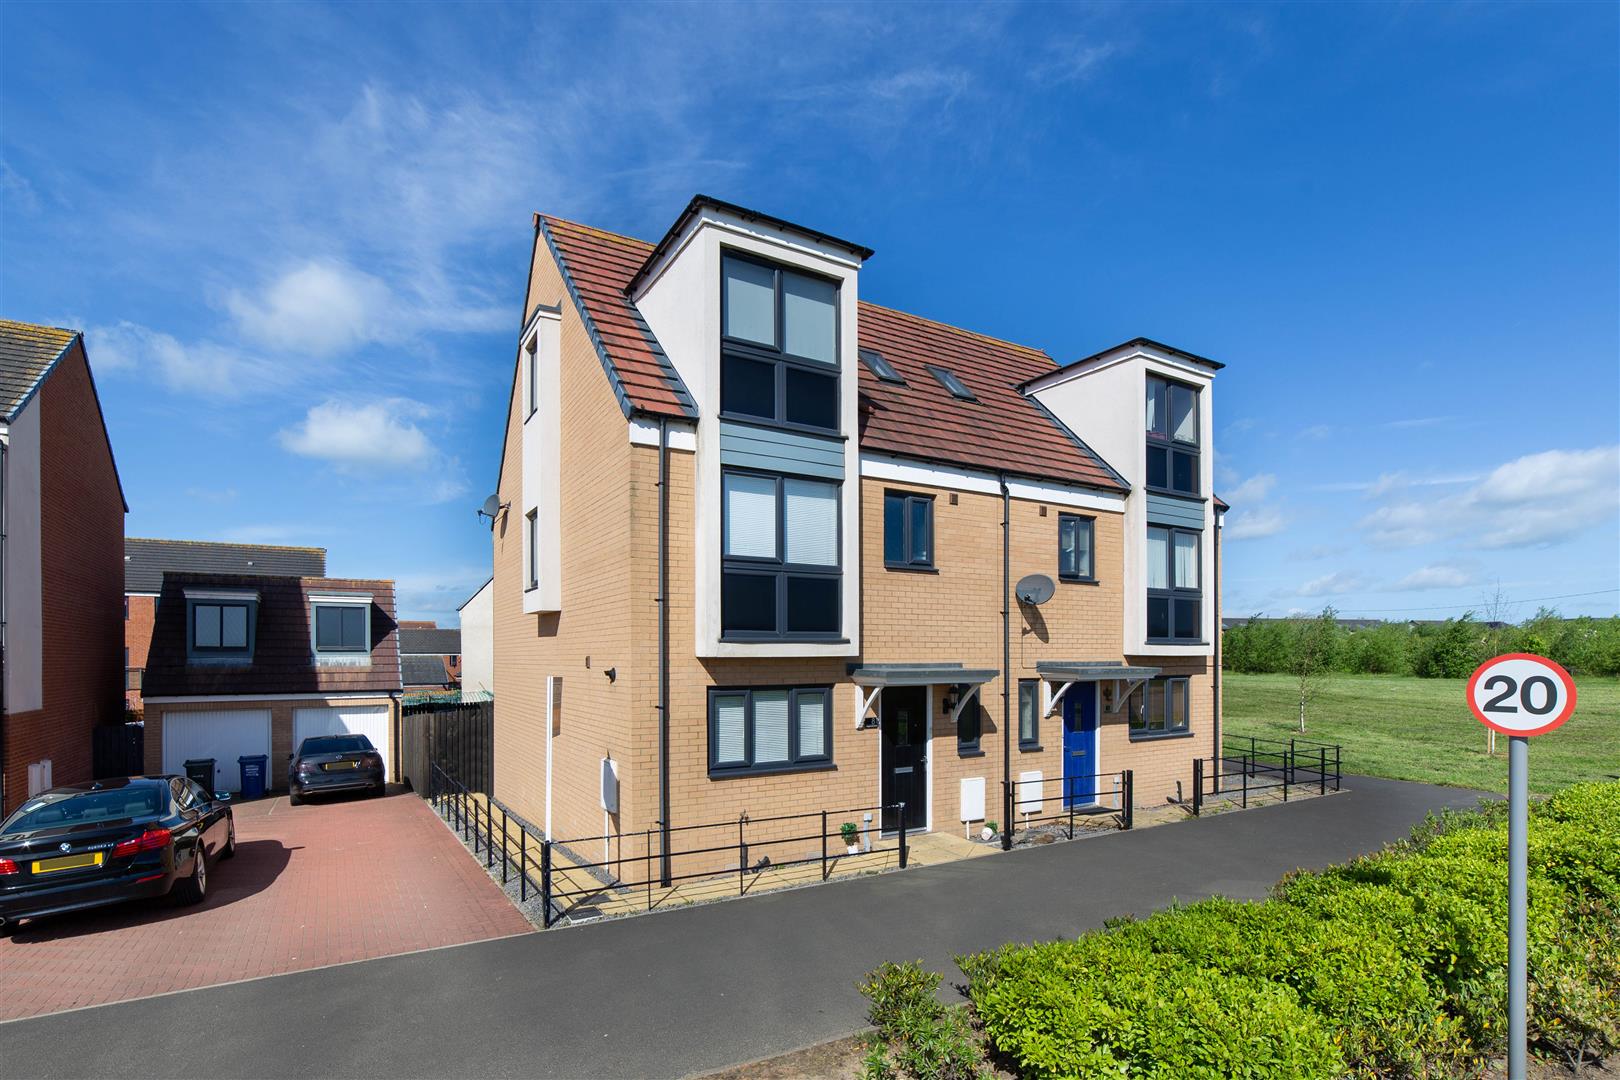 4 bed town house for sale in Wagonway Drive, Great Park, NE13